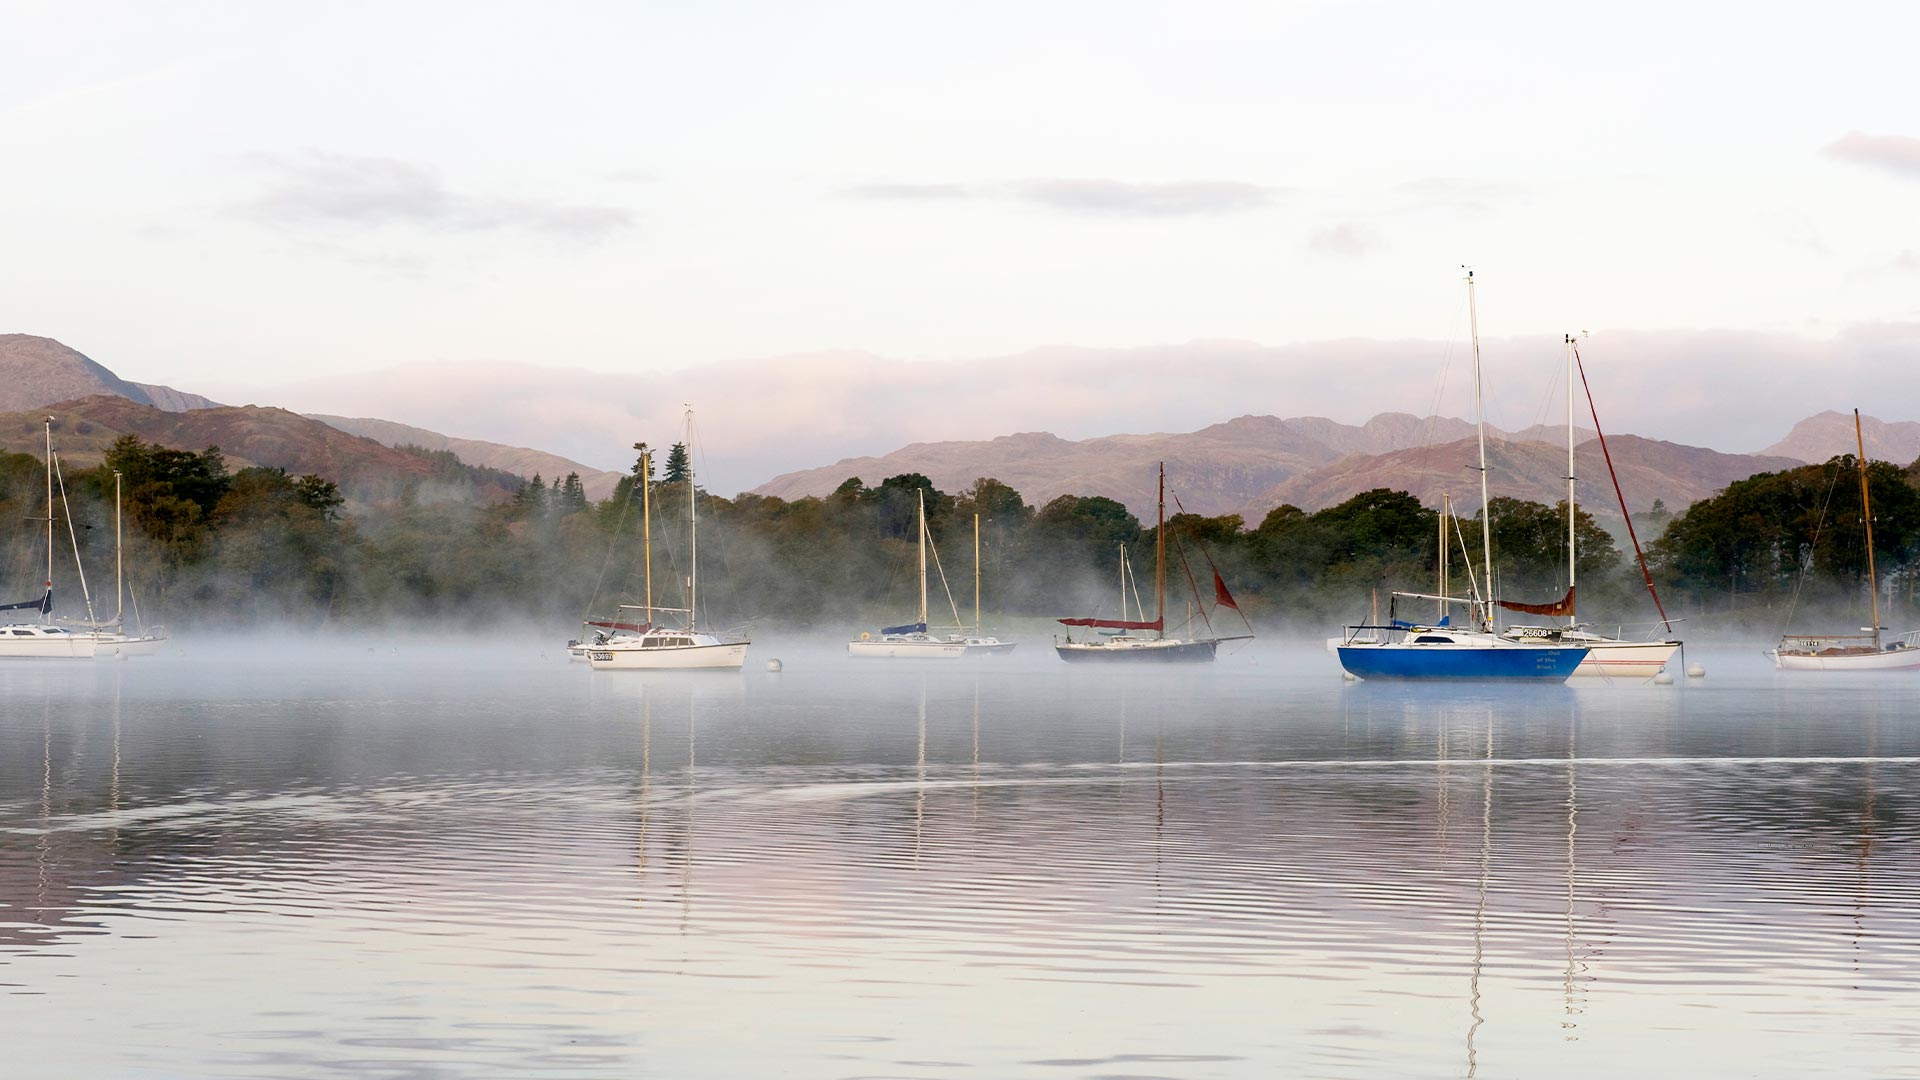 Lake Windermere is a great spot to stay, with its many activities, including cycling, sightseeing and hiking.